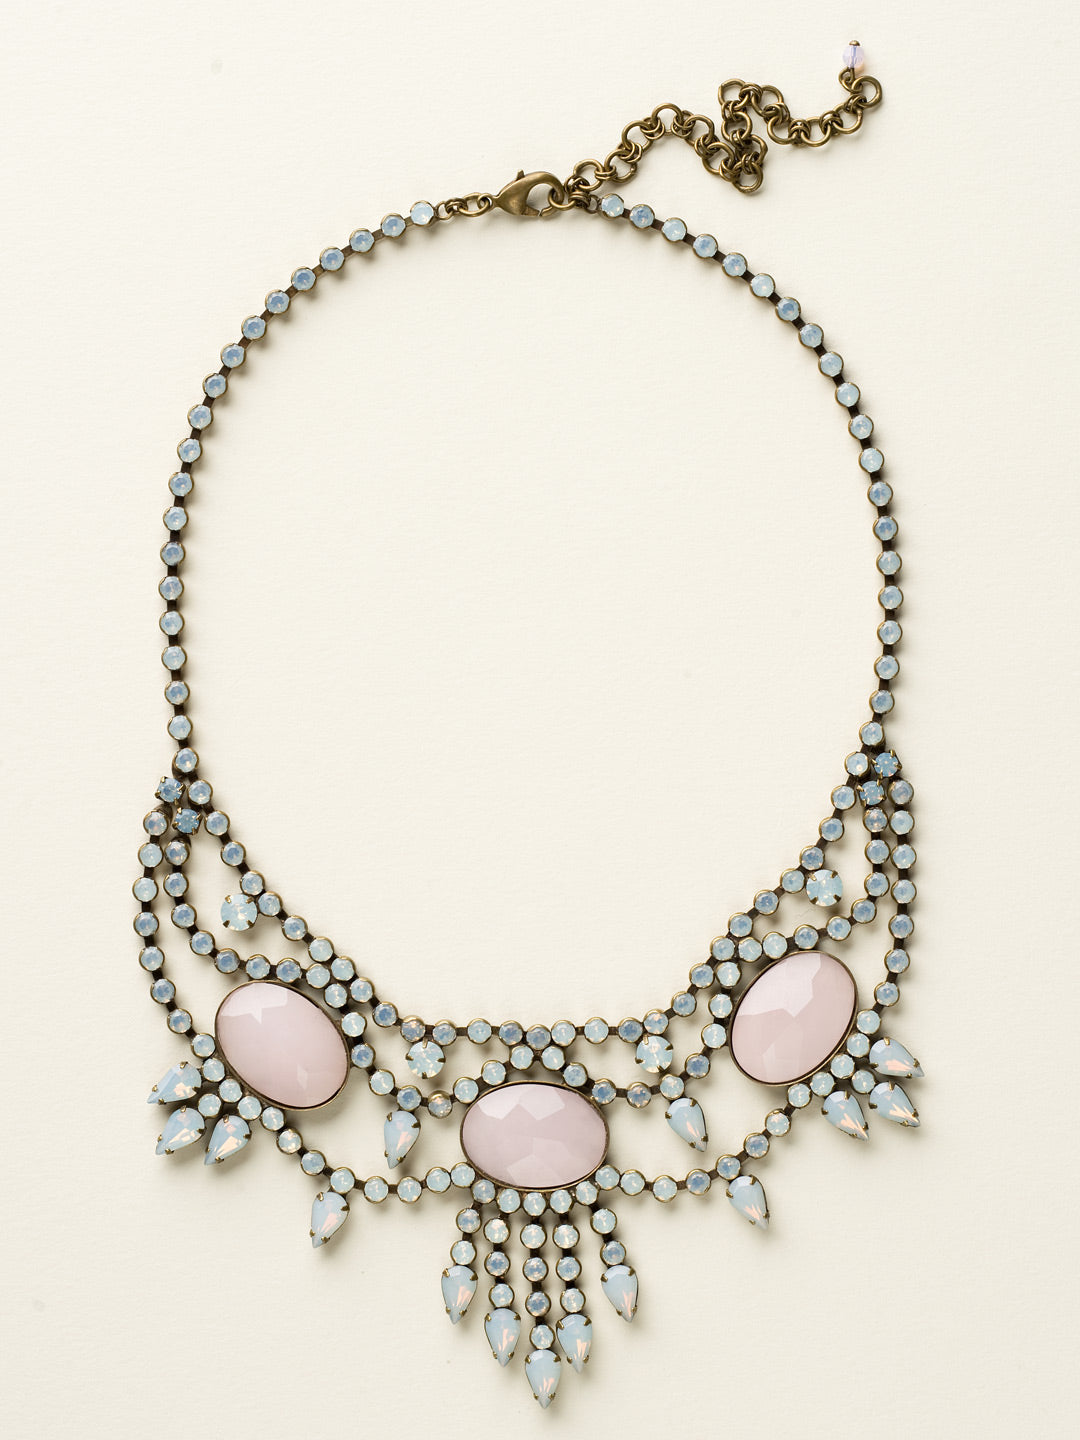 Living on the Fringe Statement Necklace - NCQ19AGROW